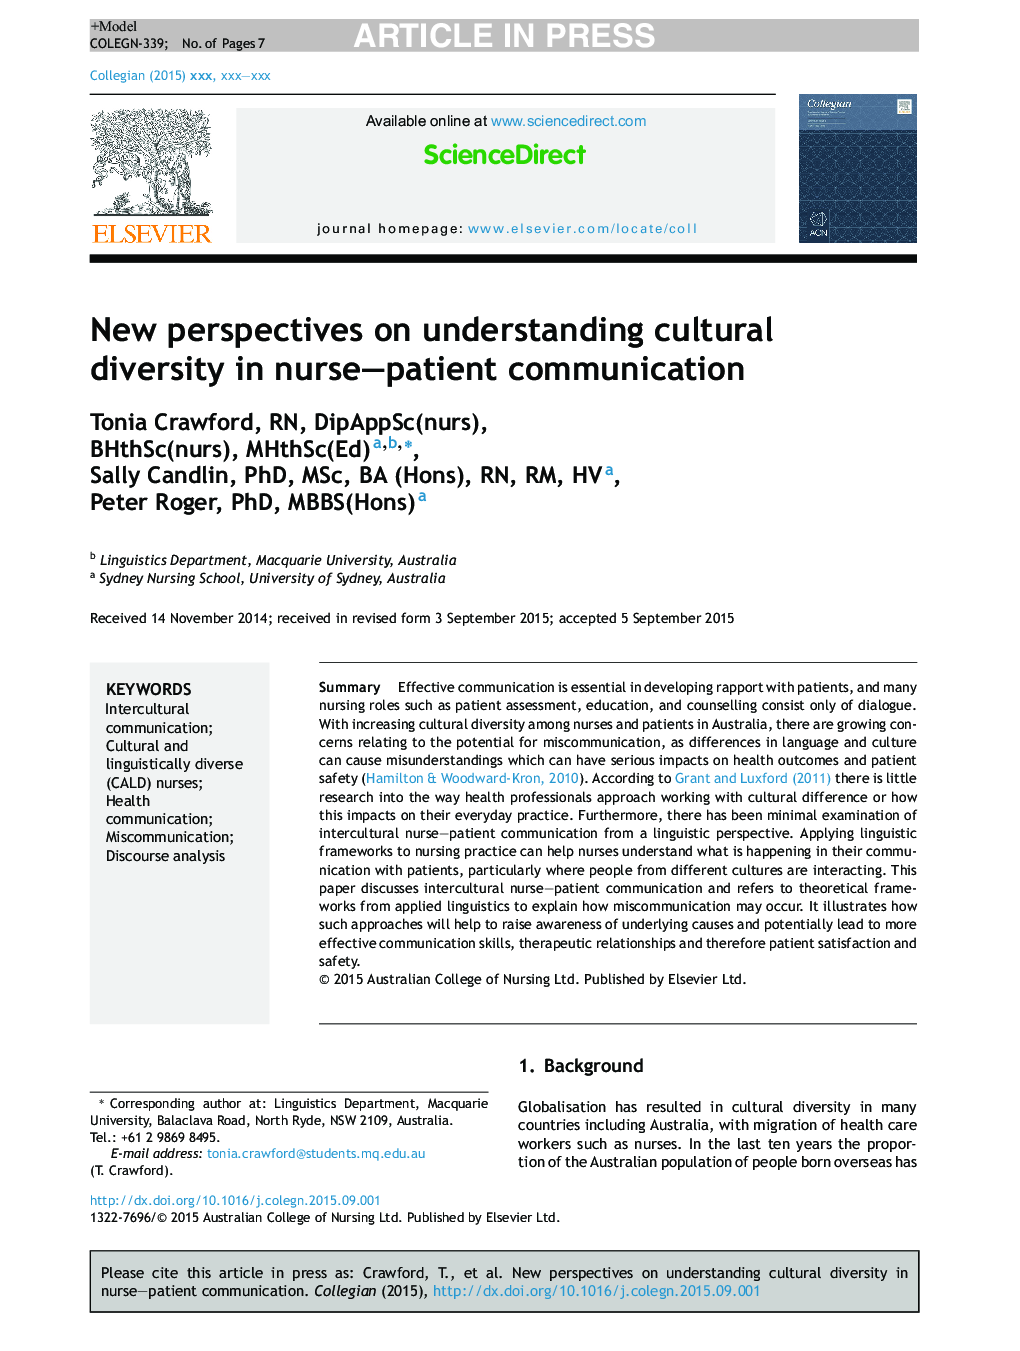 New perspectives on understanding cultural diversity in nurse-patient communication